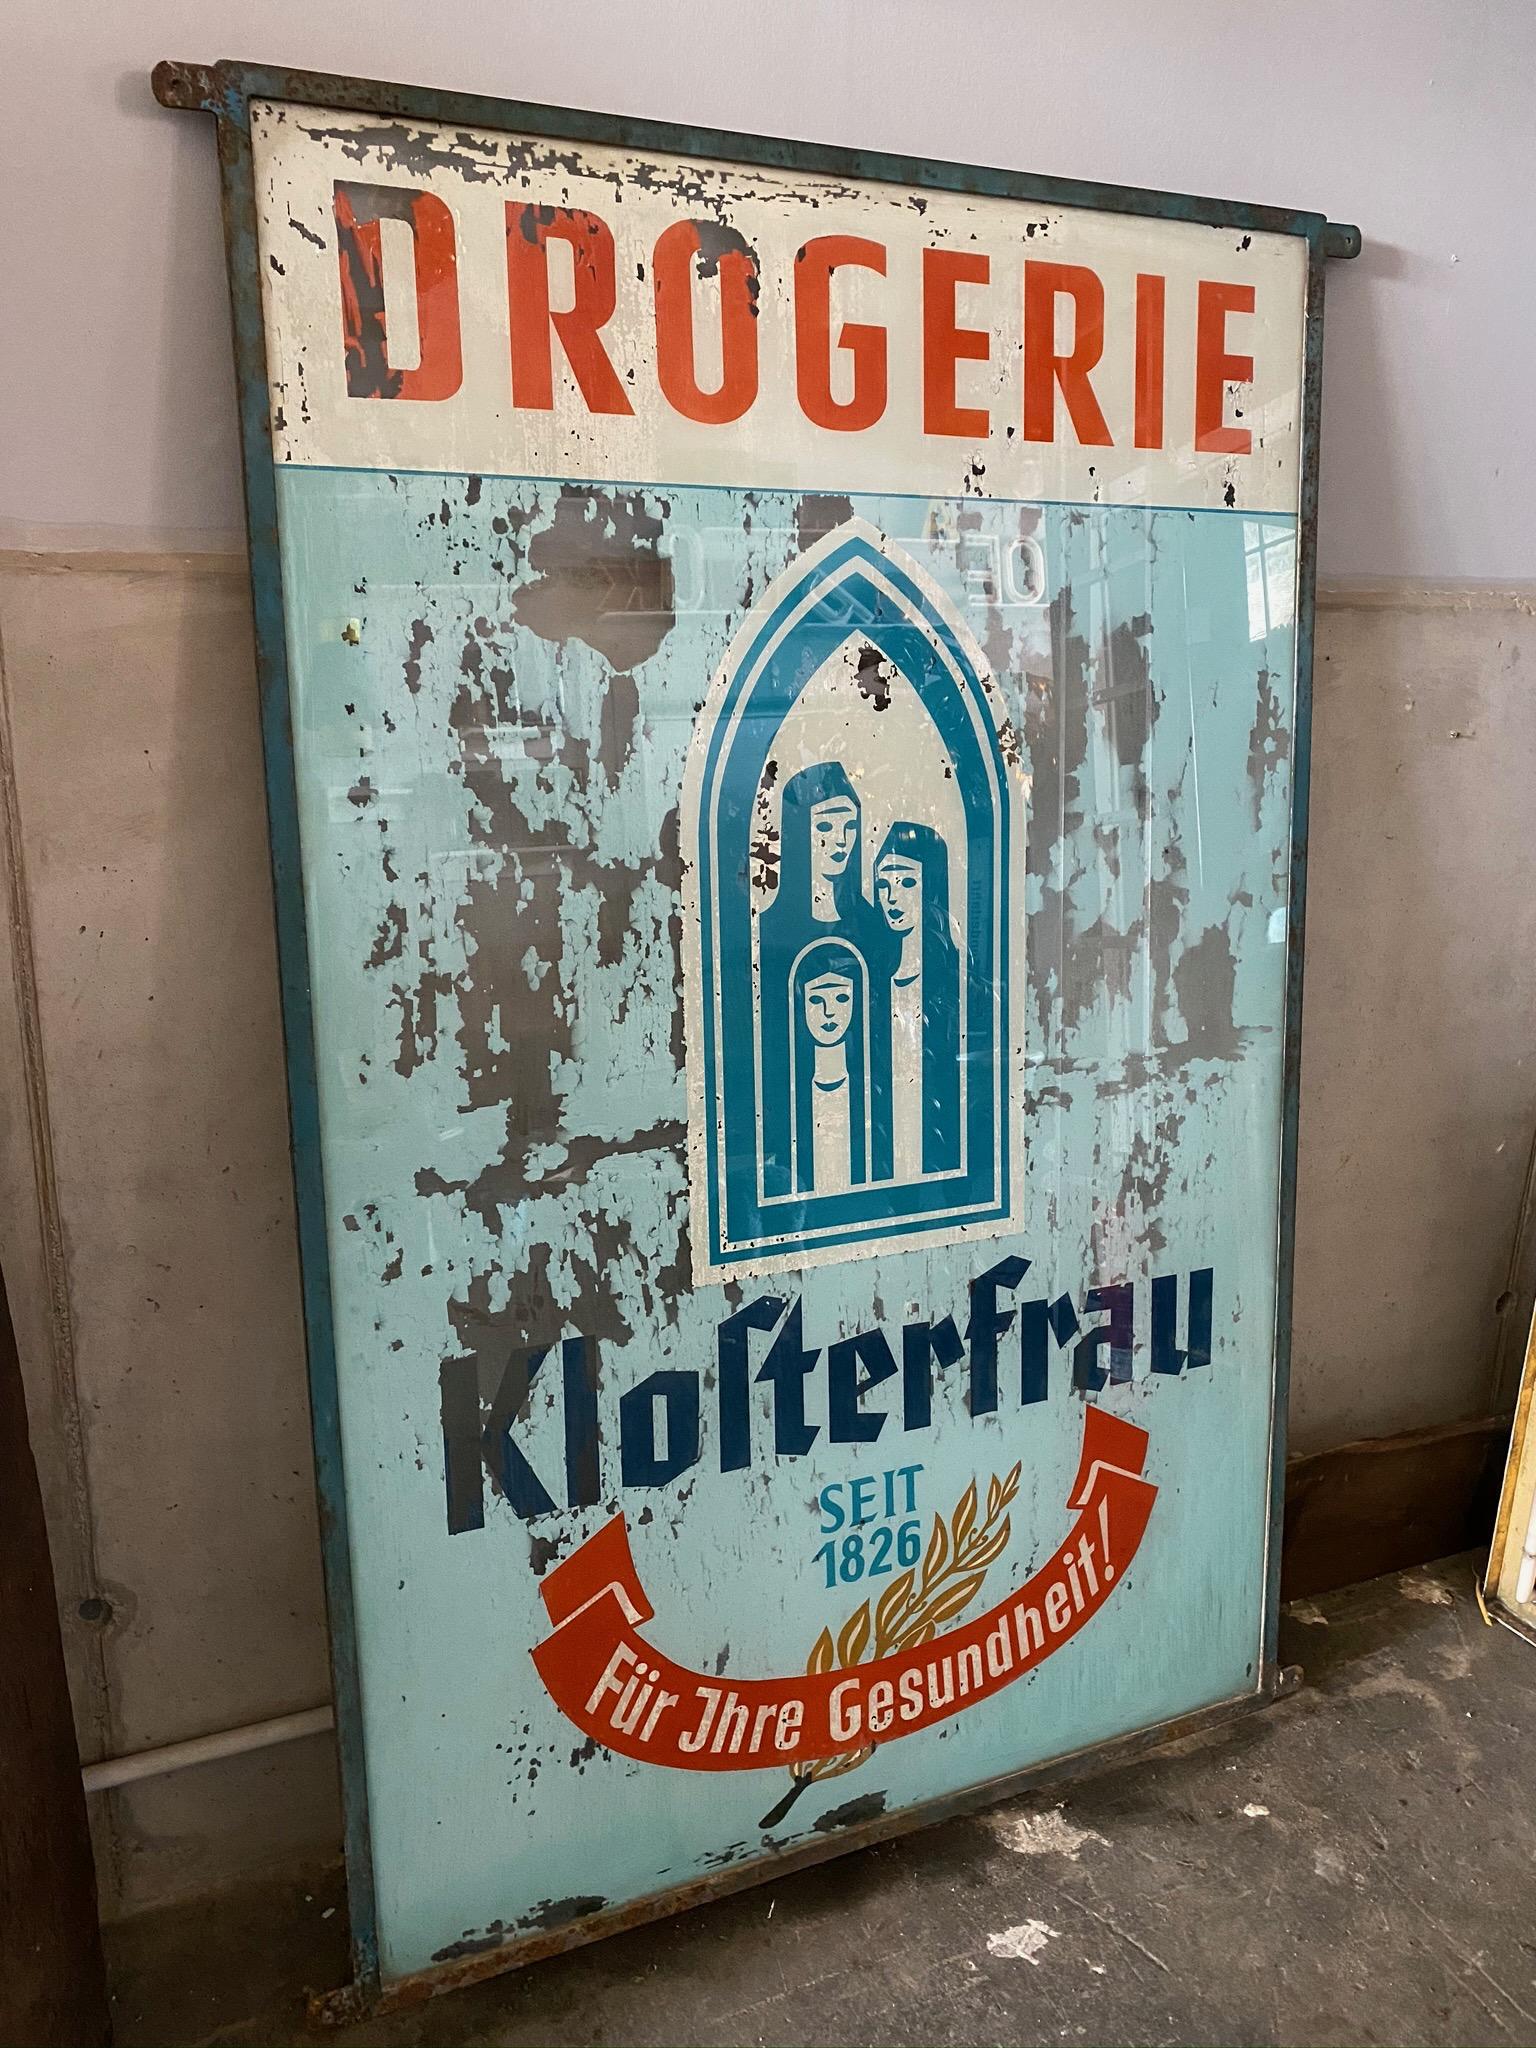 This old drugstore advertisement for Klosterfrau comes from a drugstore liquidation and is from the 1920s. The advertisement was painted behind glass, which is slowly peeling off. Framed in blue lacquered metal and provided with 4 eyelets for